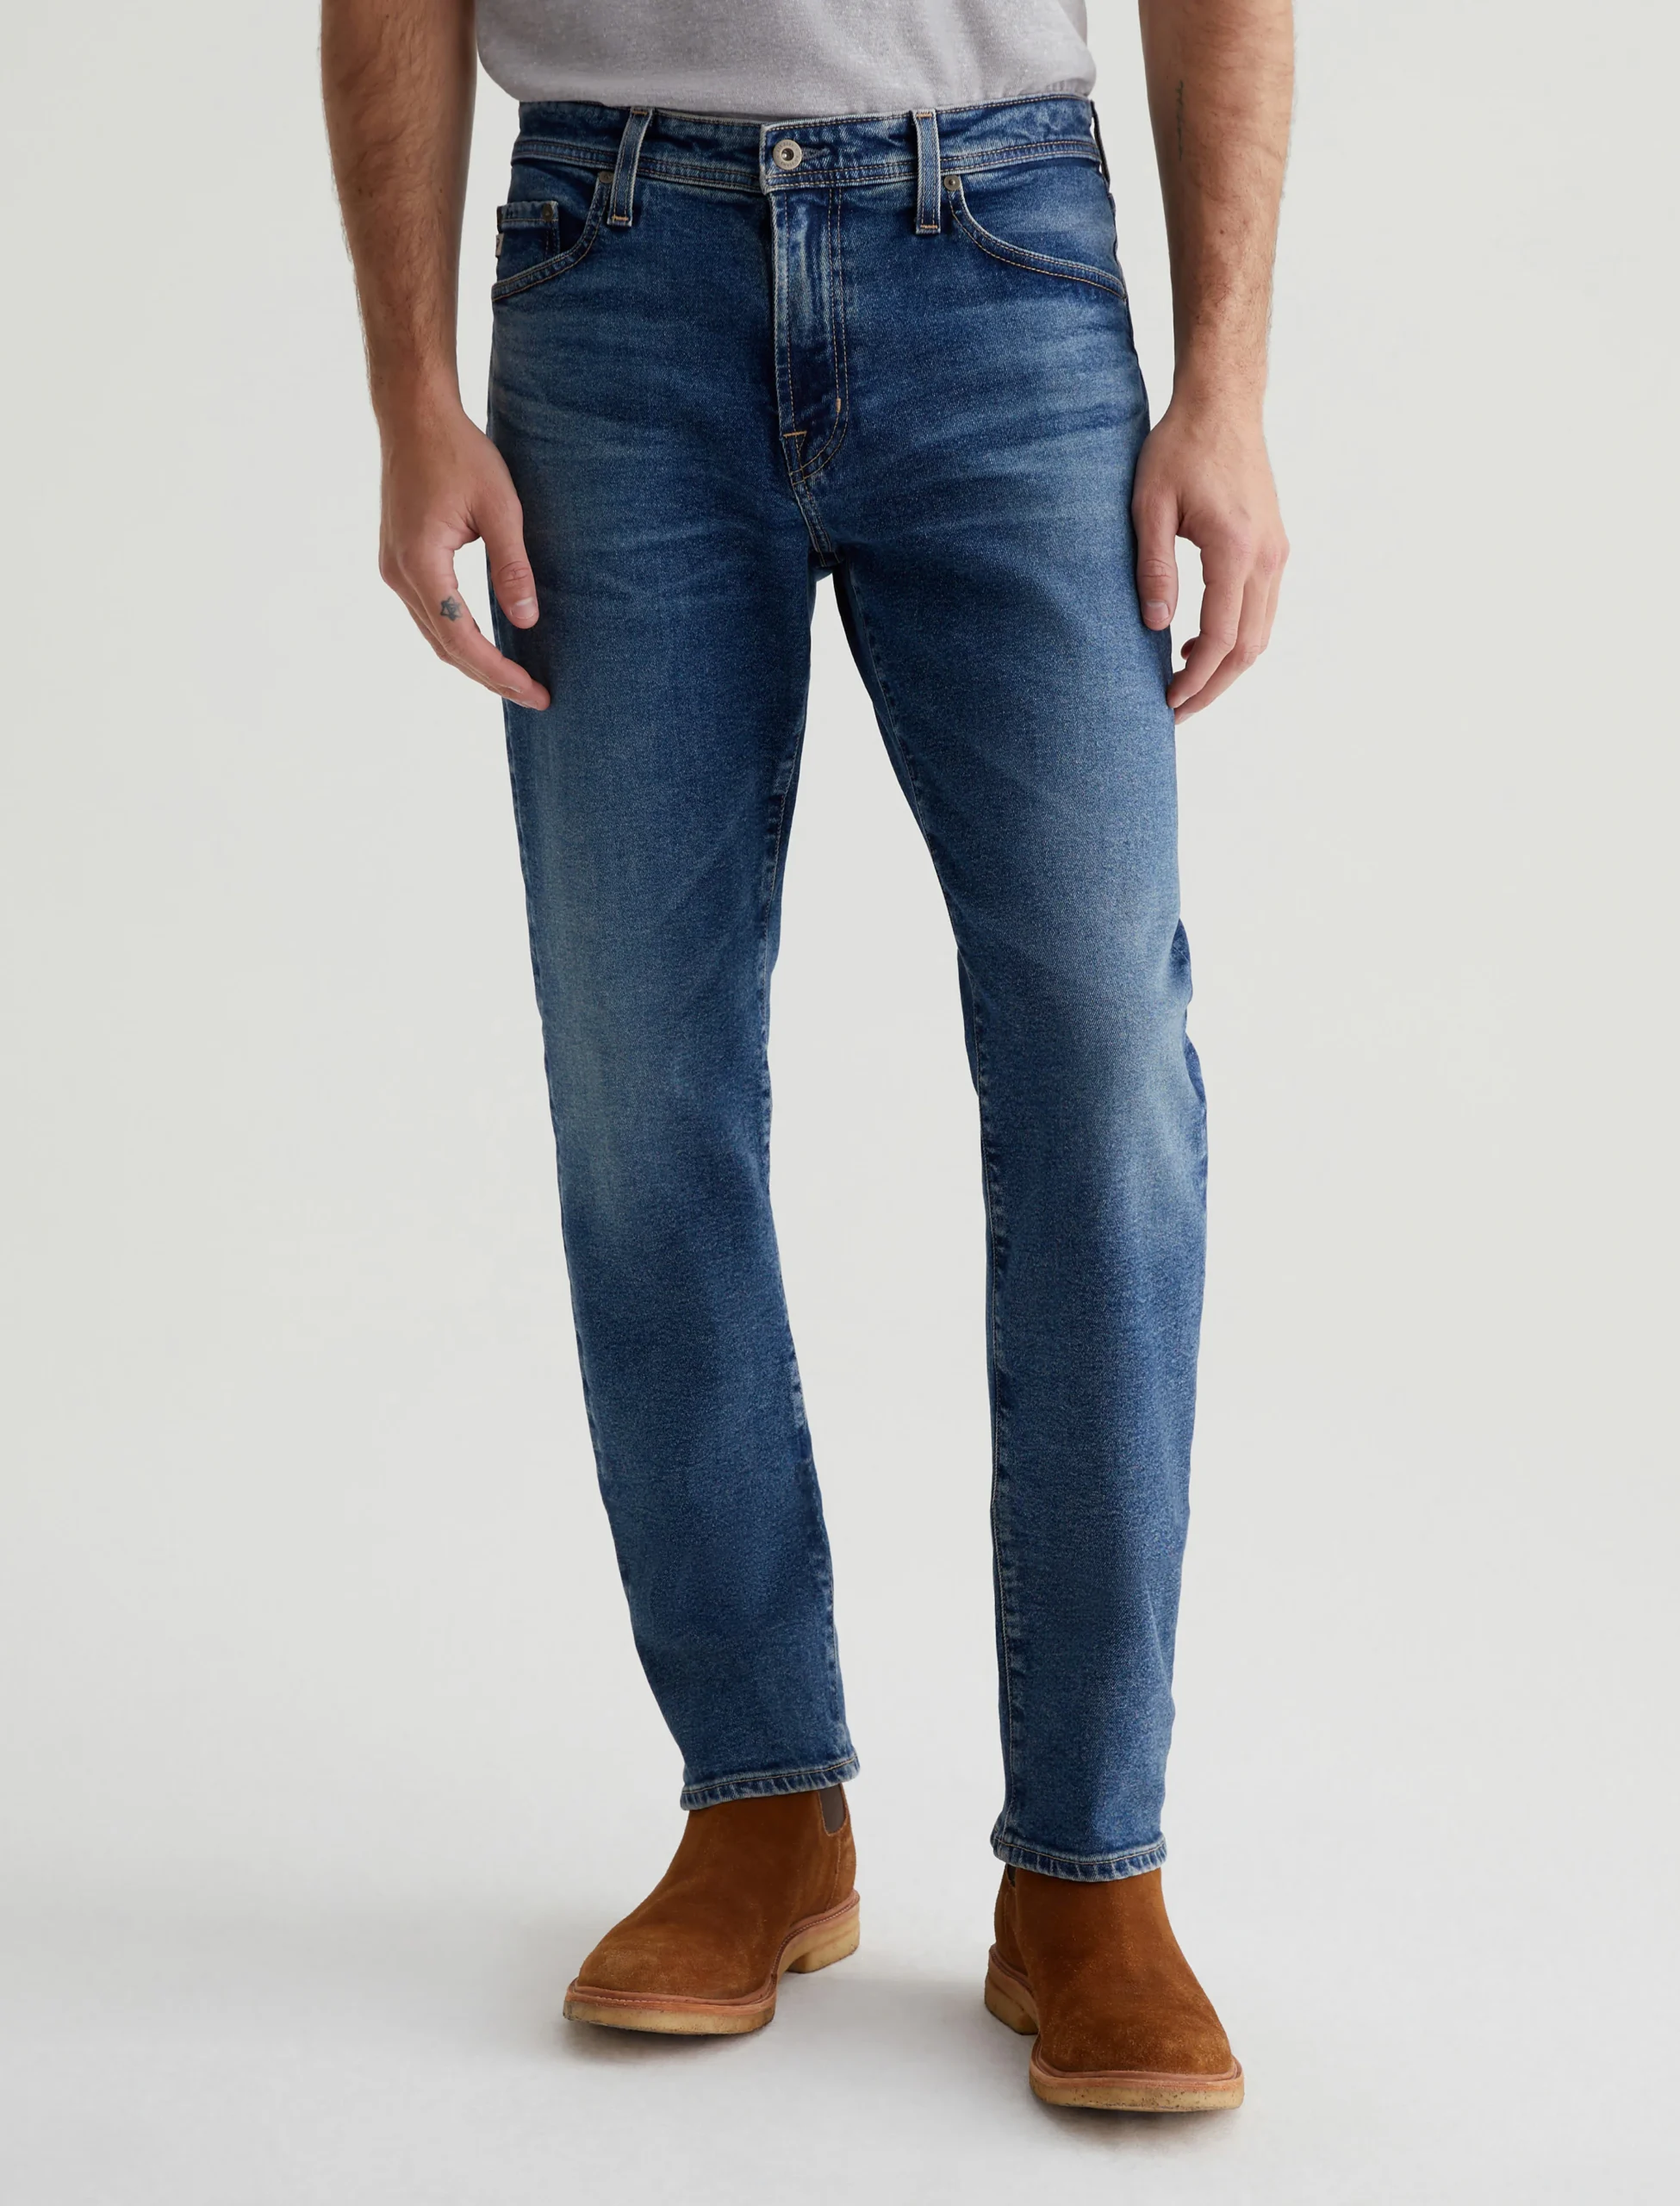 A person wearing straight leg jeans.